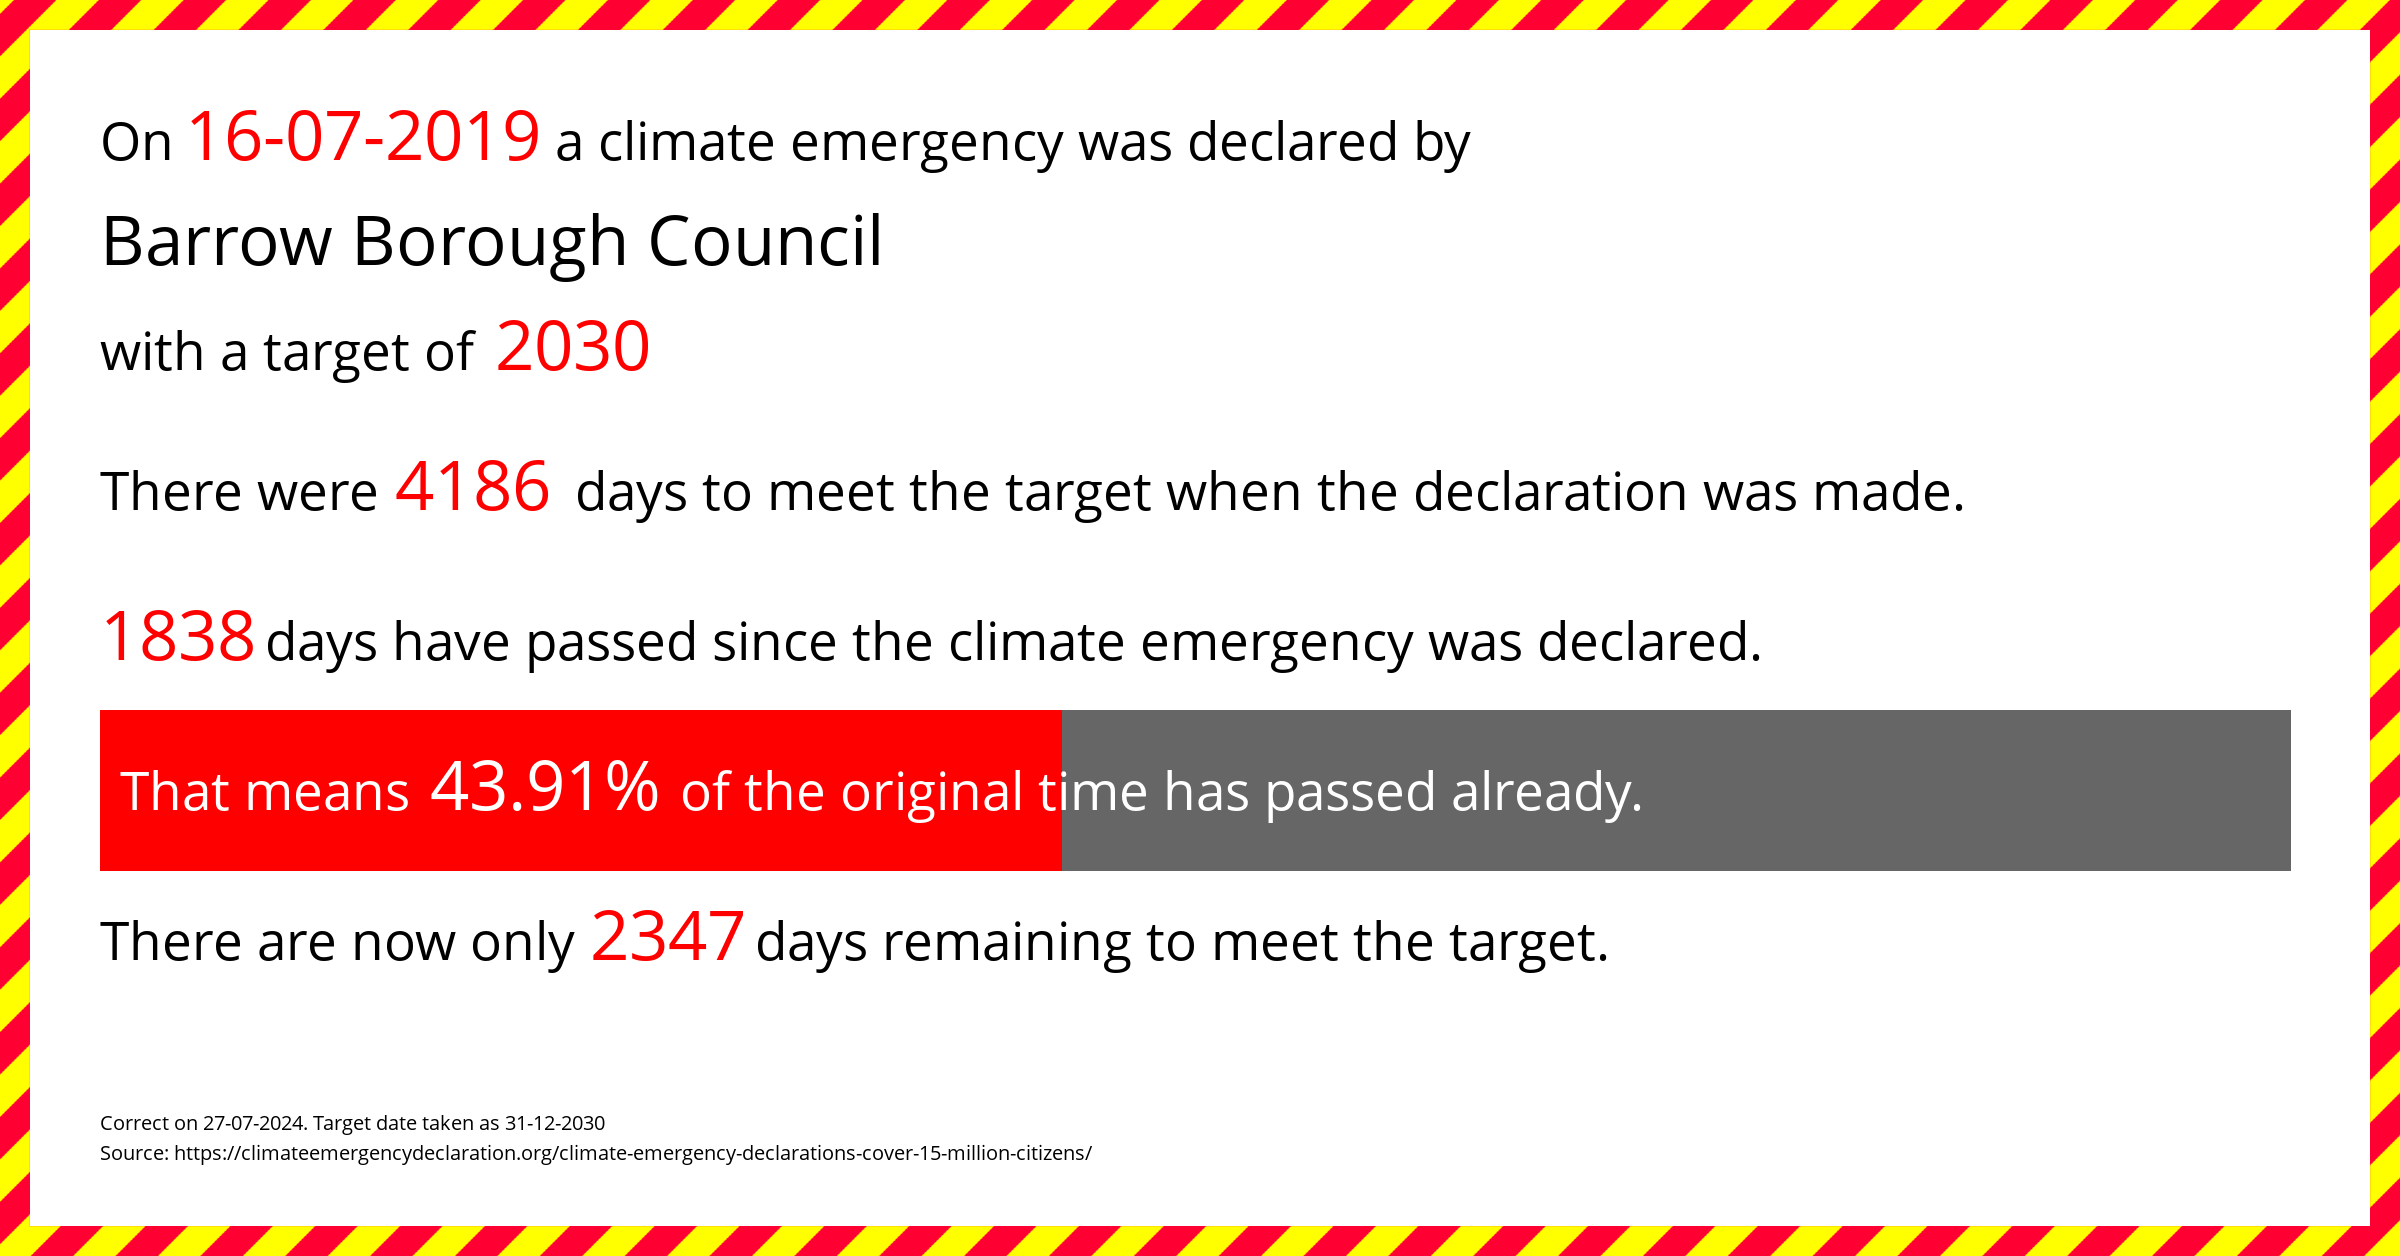 Barrow Borough Council declared a Climate emergency on Tuesday 16th July 2019, with a target of 2030.